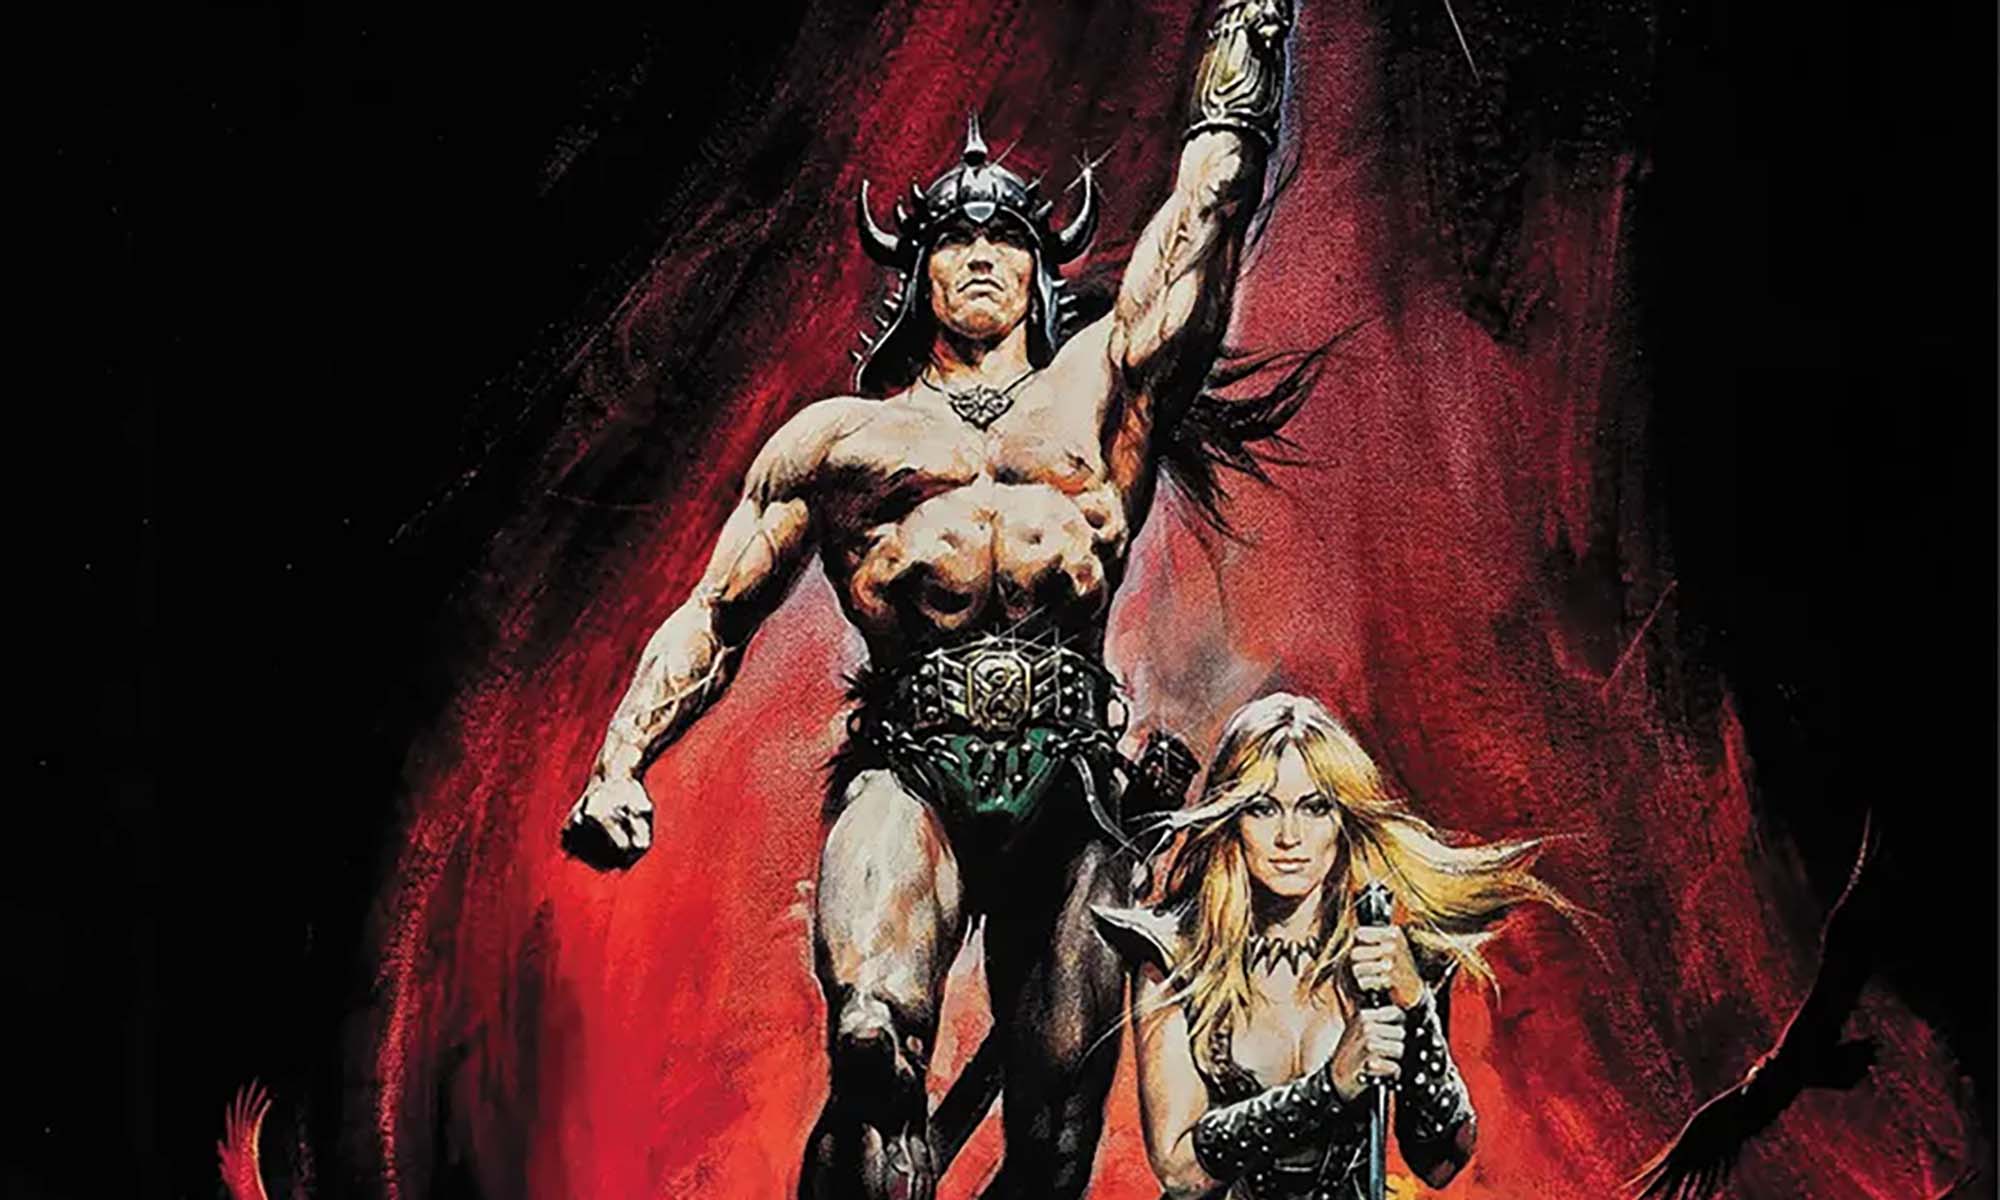 Conan the Barbarian: The Official Story of the Film cover